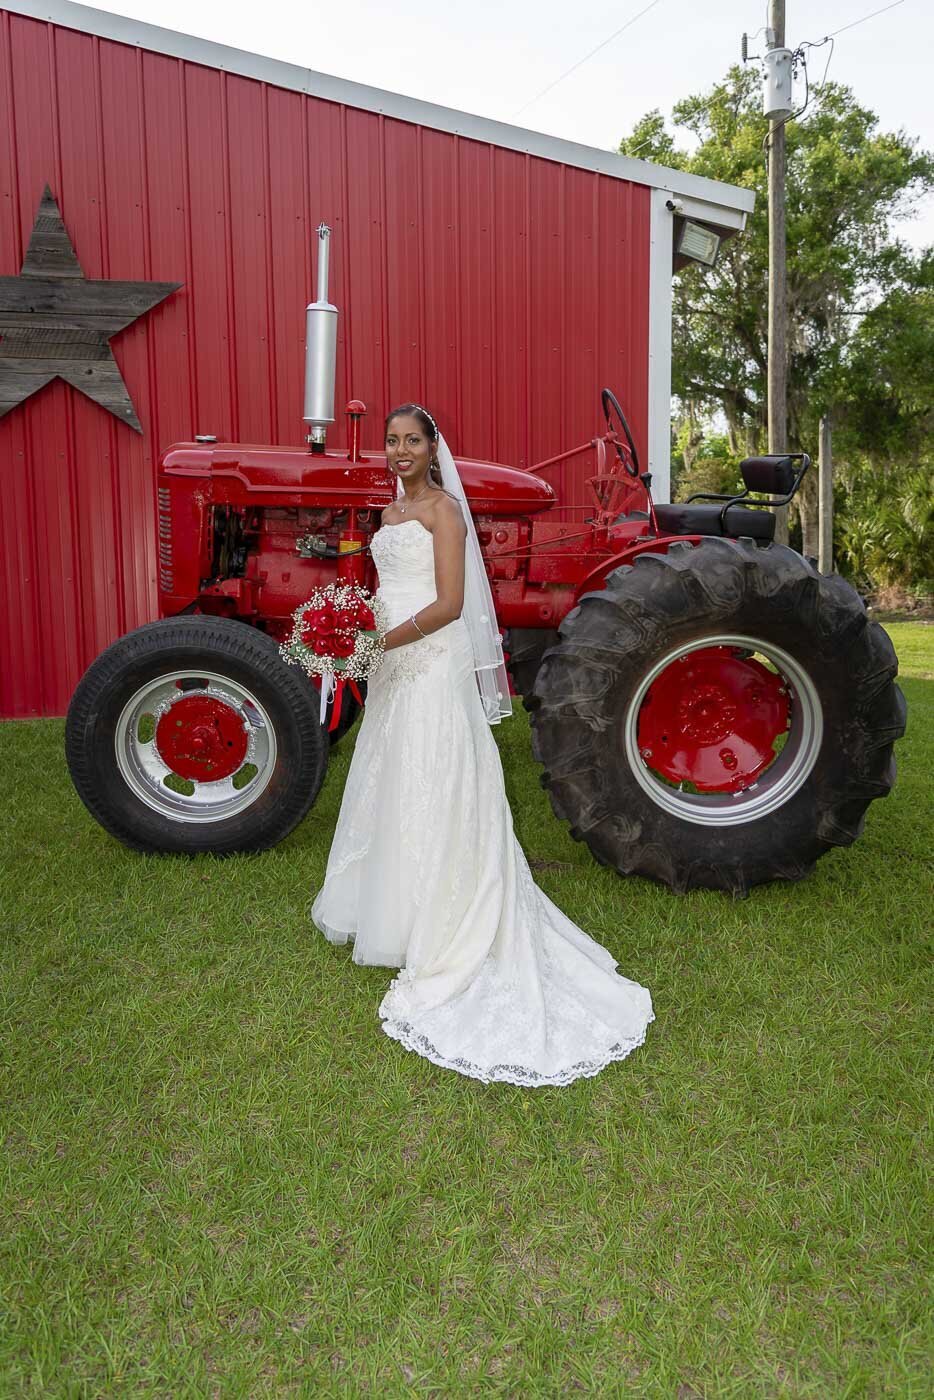 A bride poses in front of a red tractor and a red barn.